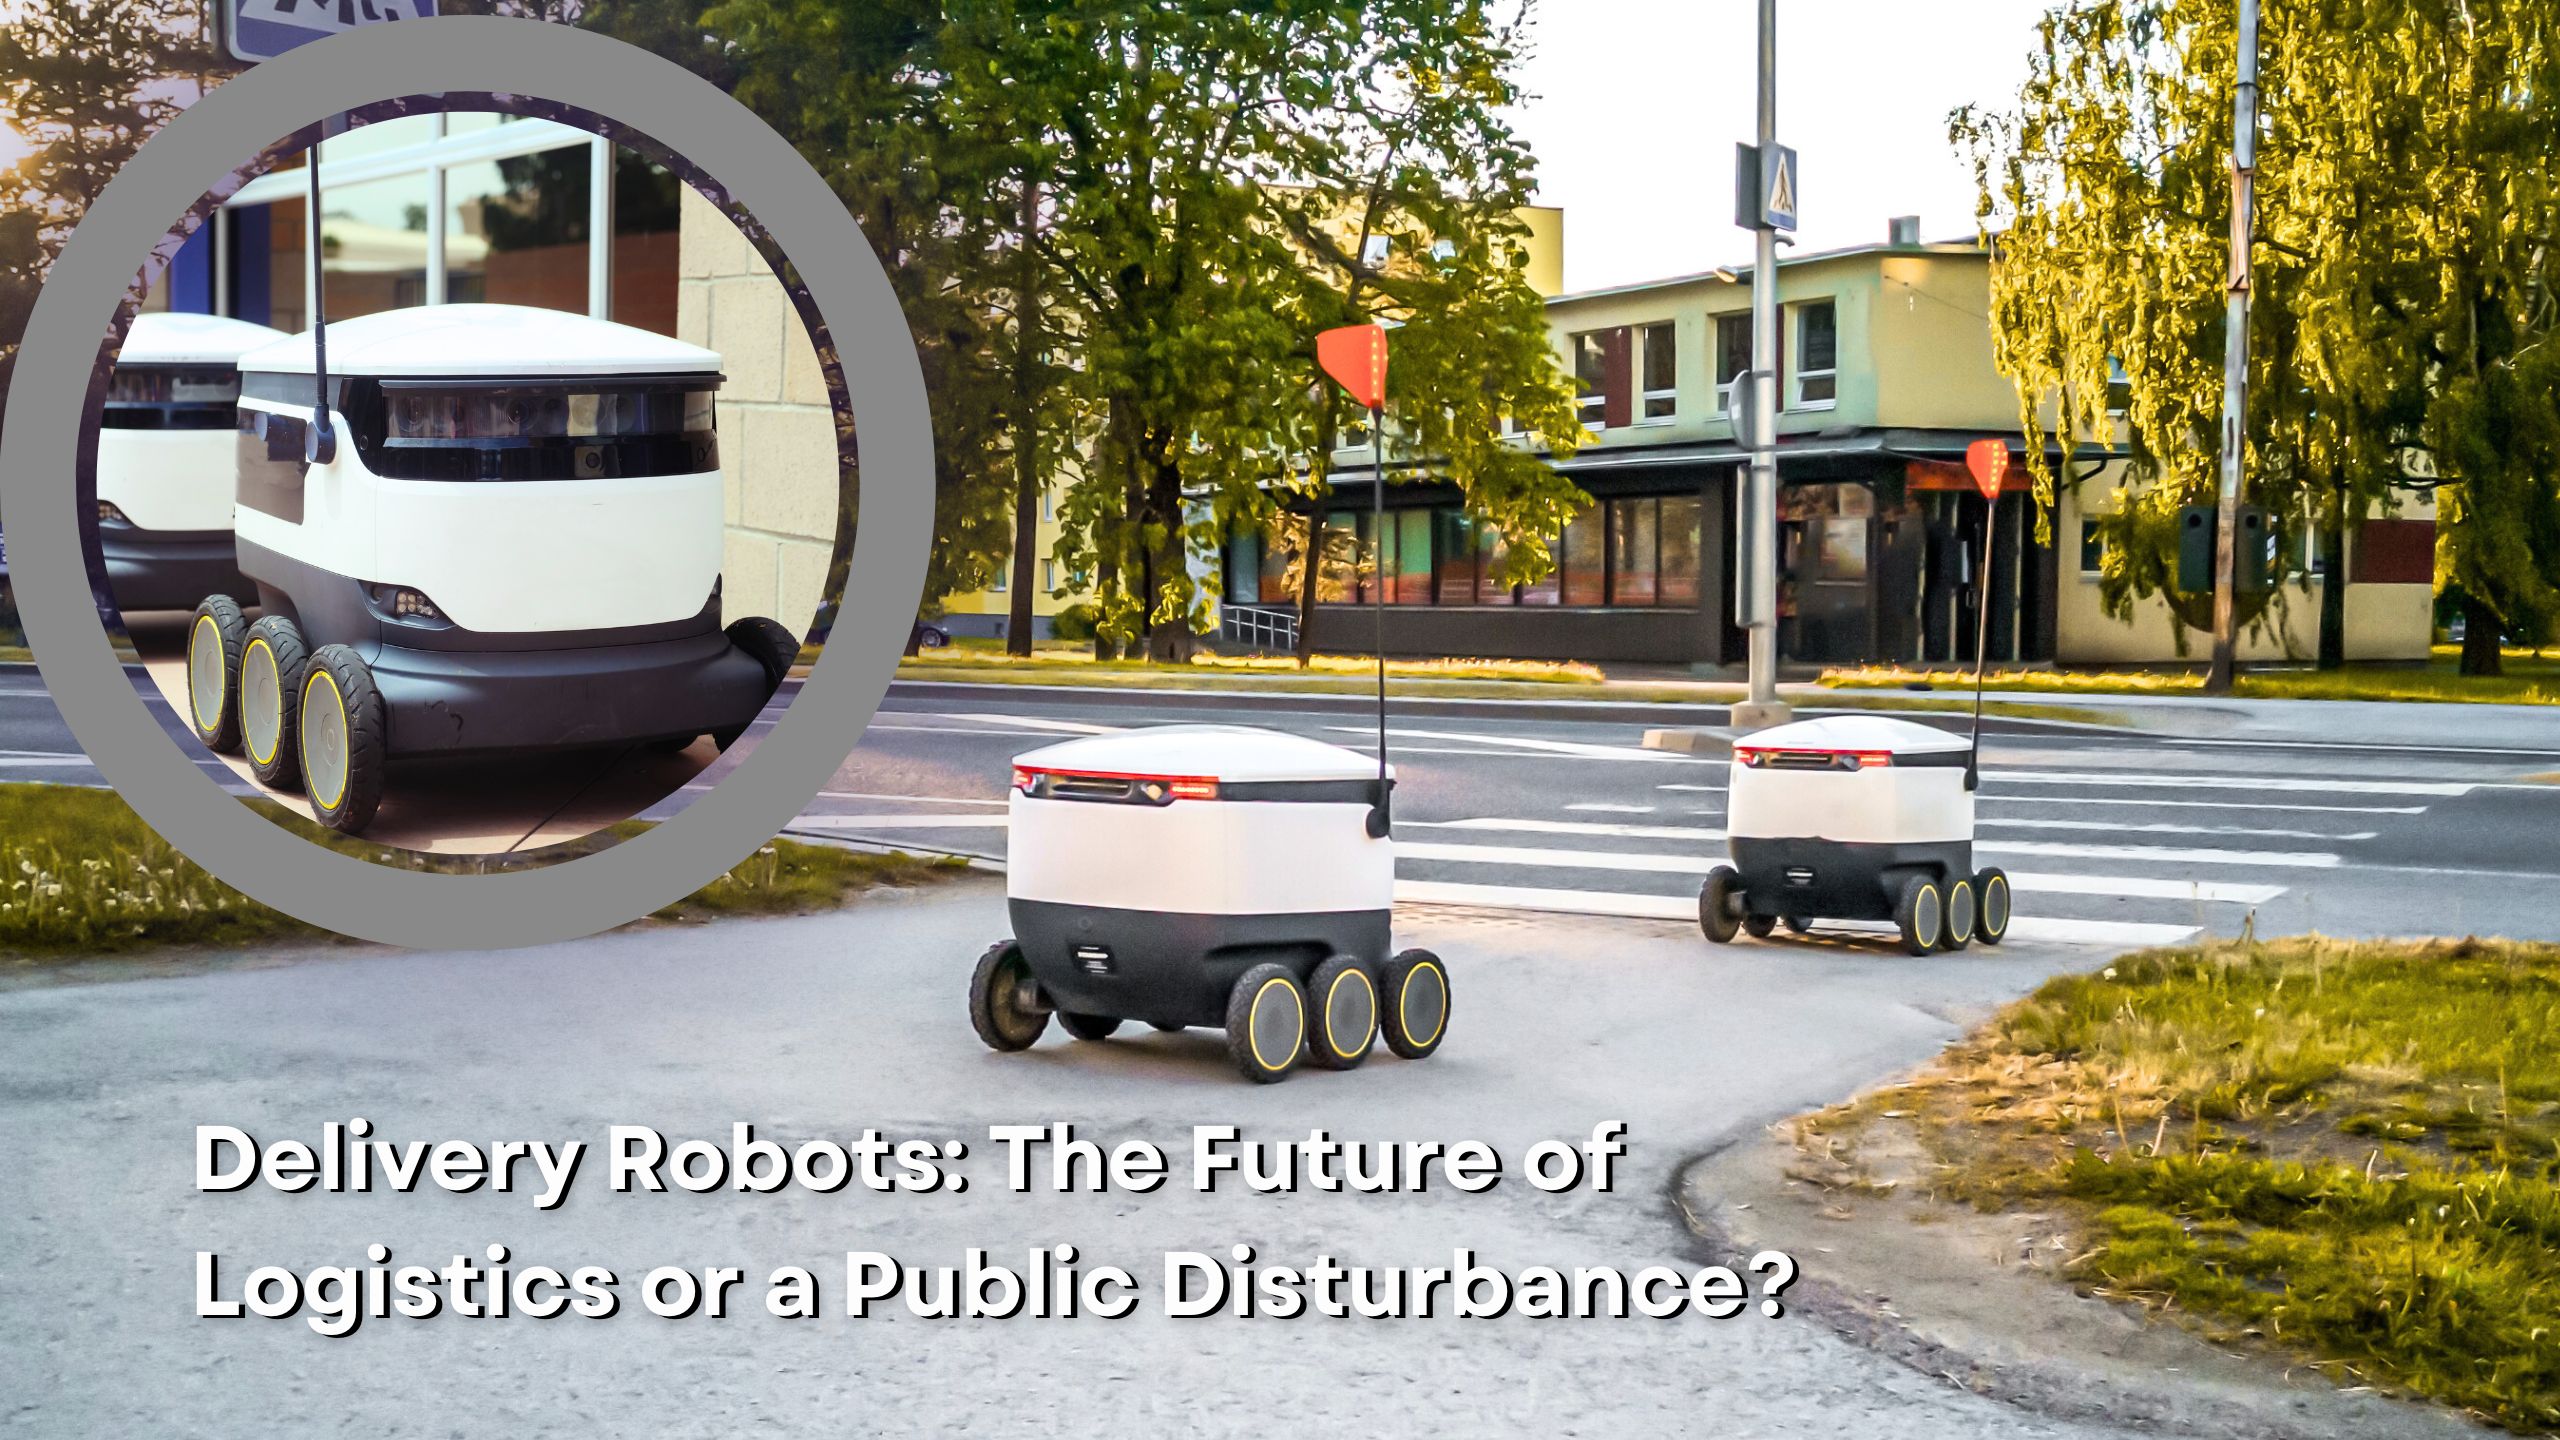 Delivery Robots: The Future of Logistics